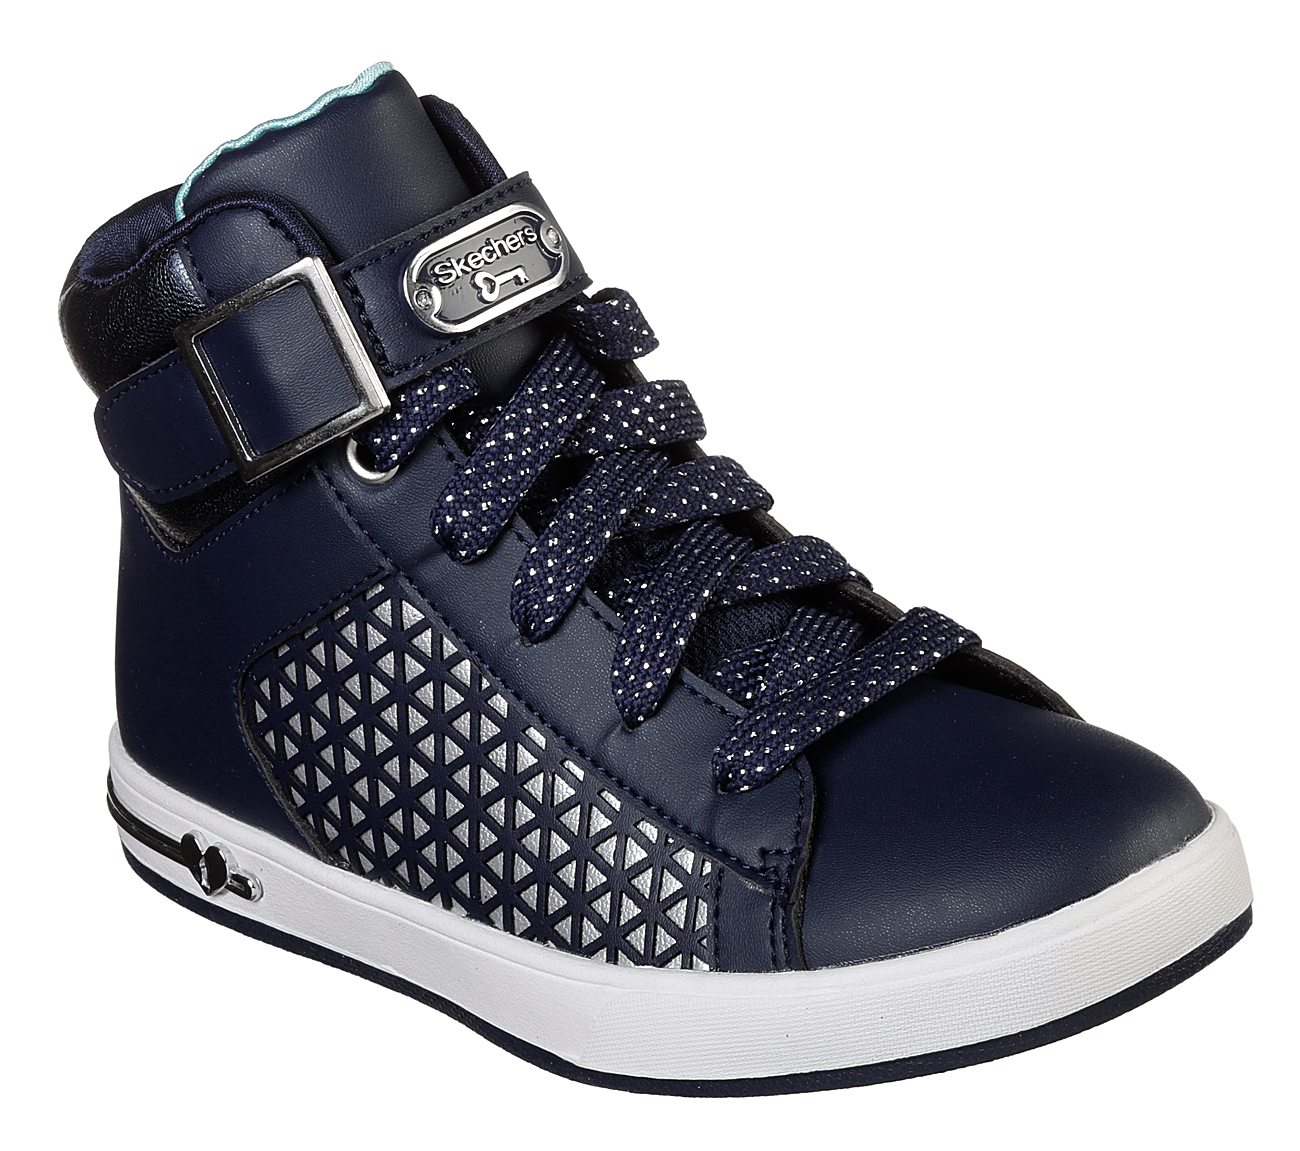 Buy SKECHERS Shoutouts - Edgy Glam Lace 